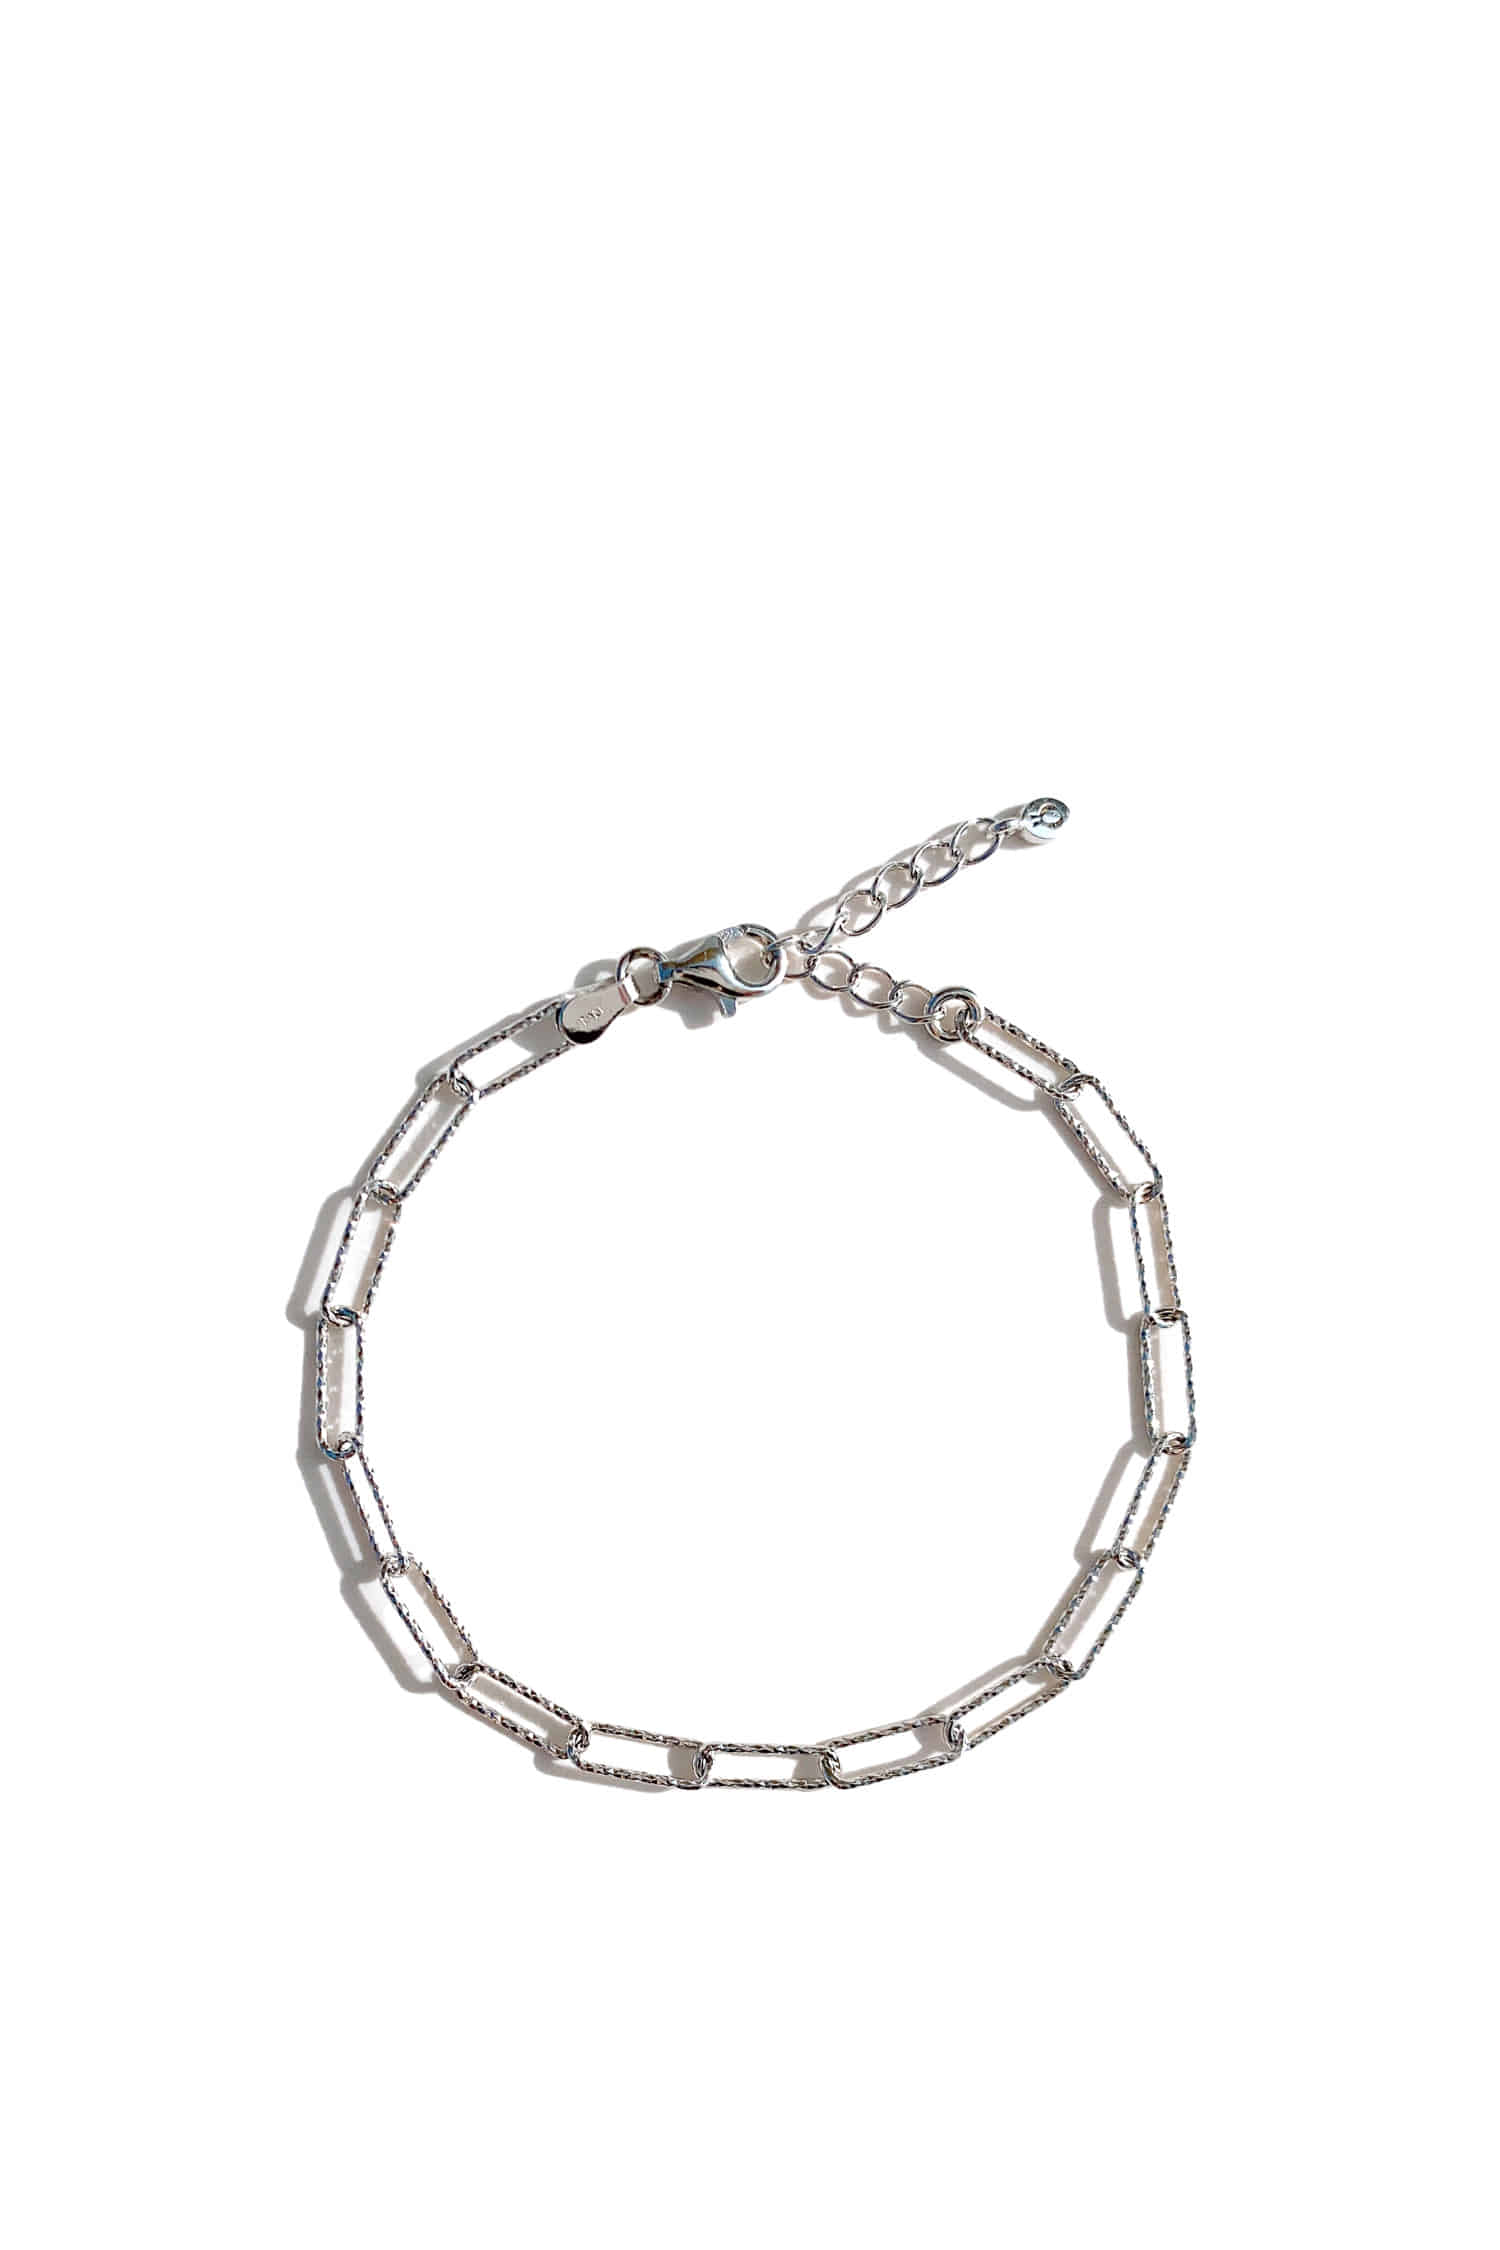 PS002 ITALY CHAIN Silver 925 Bracelet